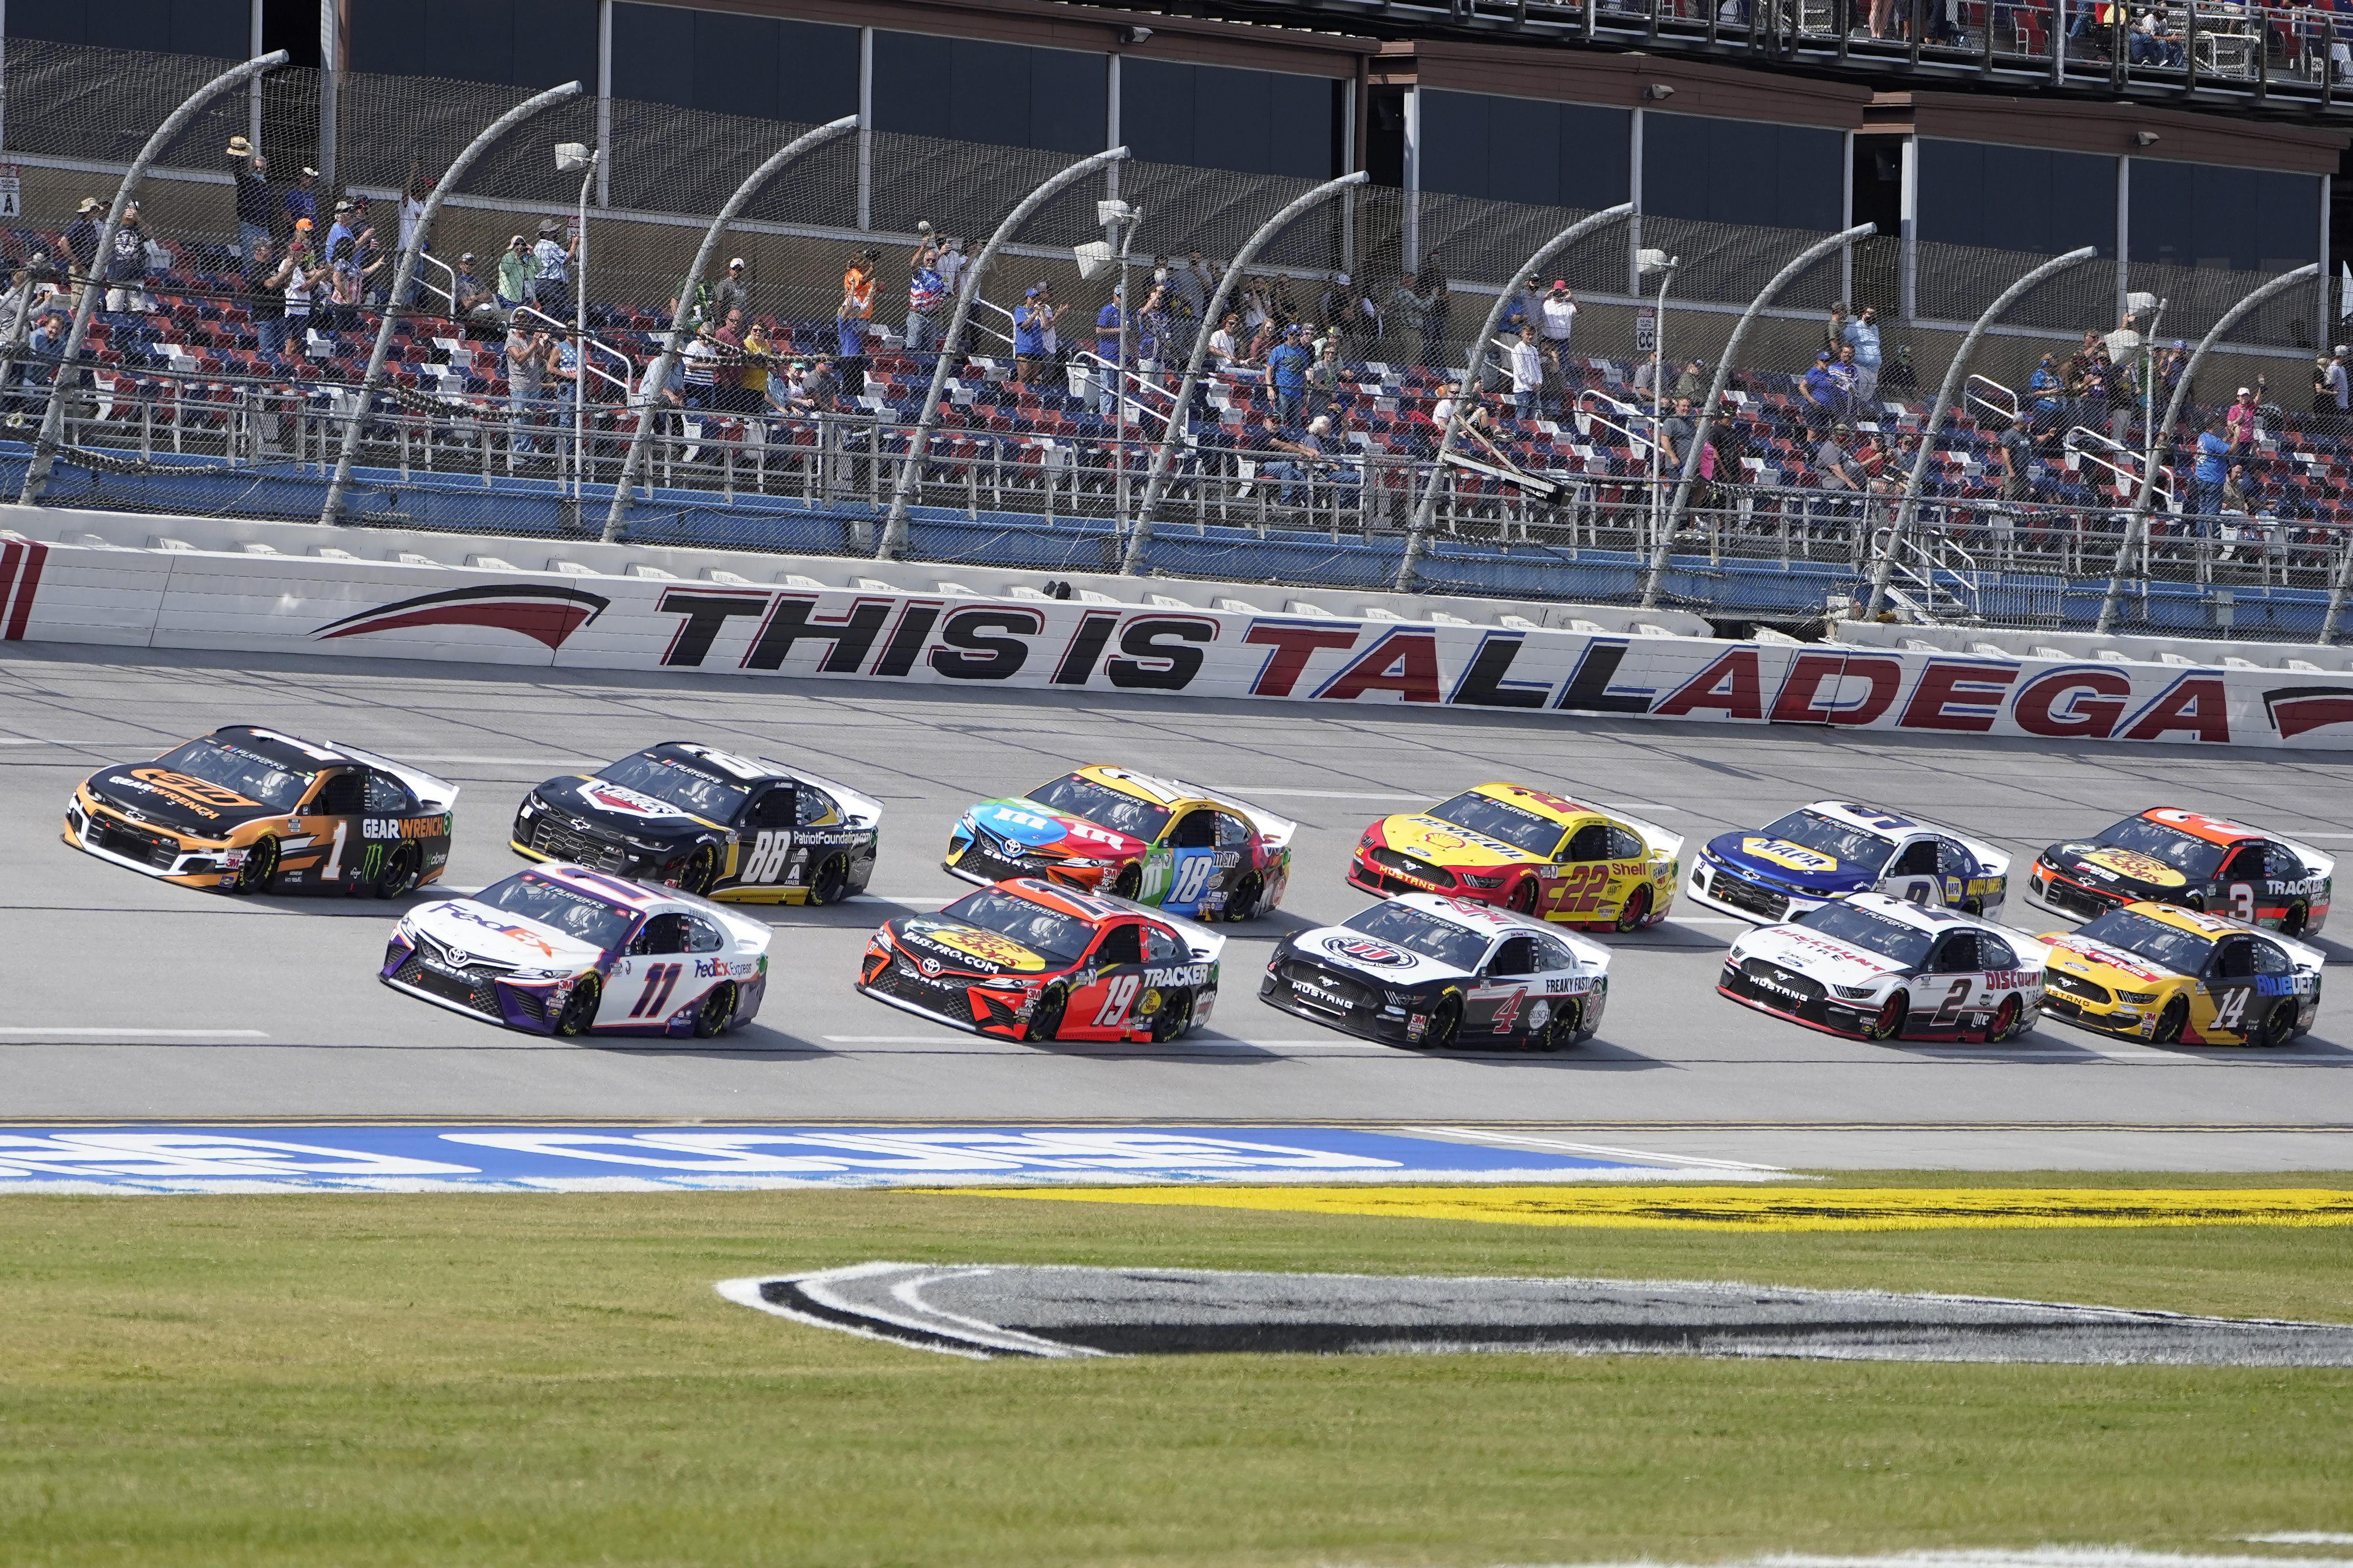 Geico 500 at Talladega Live stream, start time, TV channel, how to watch NASCAR Cup Series race (Sun., April 25)